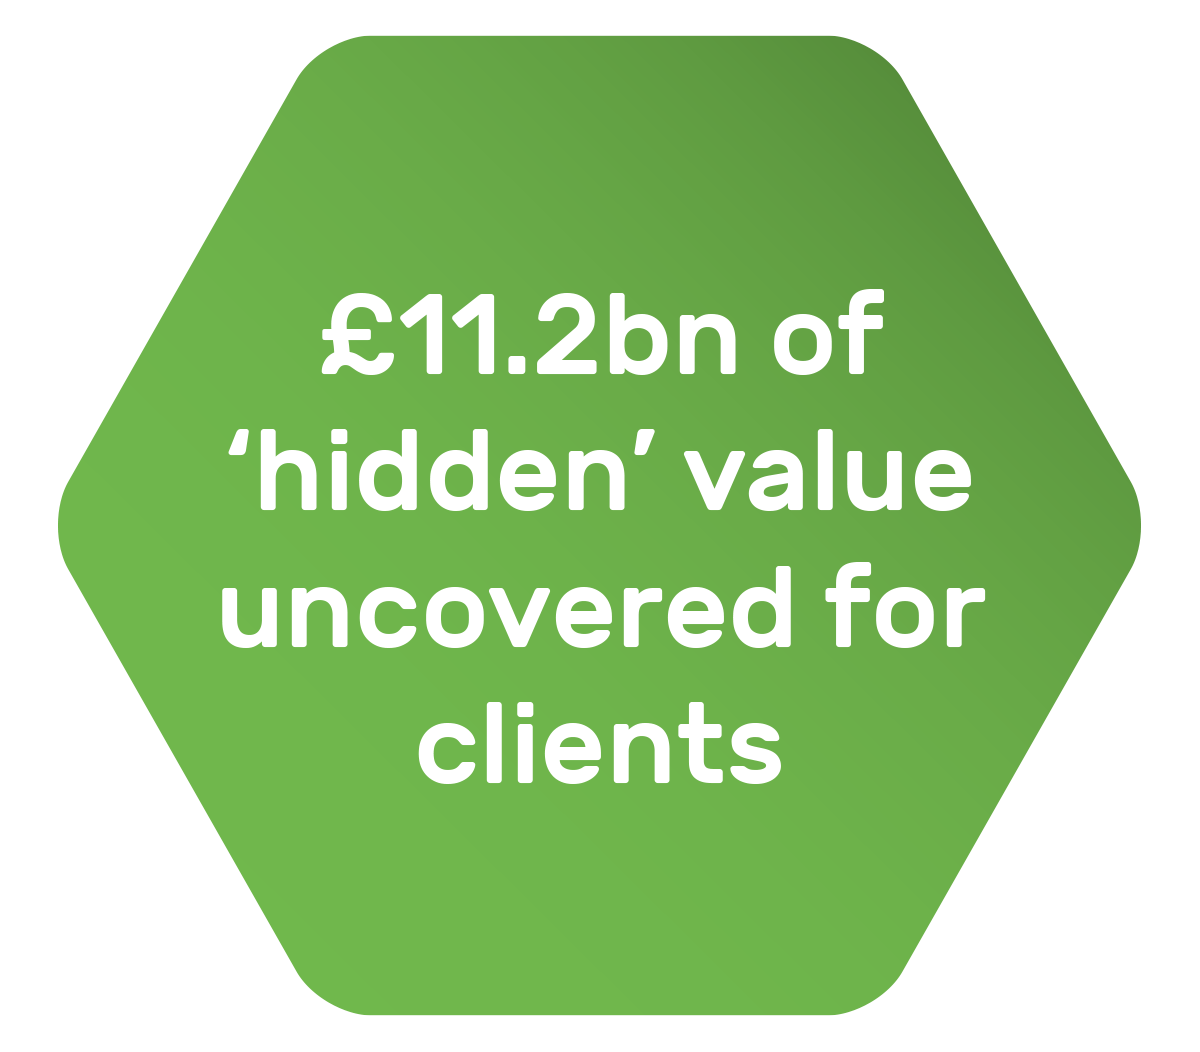 £11.2bn of hidden value uncovered for clients